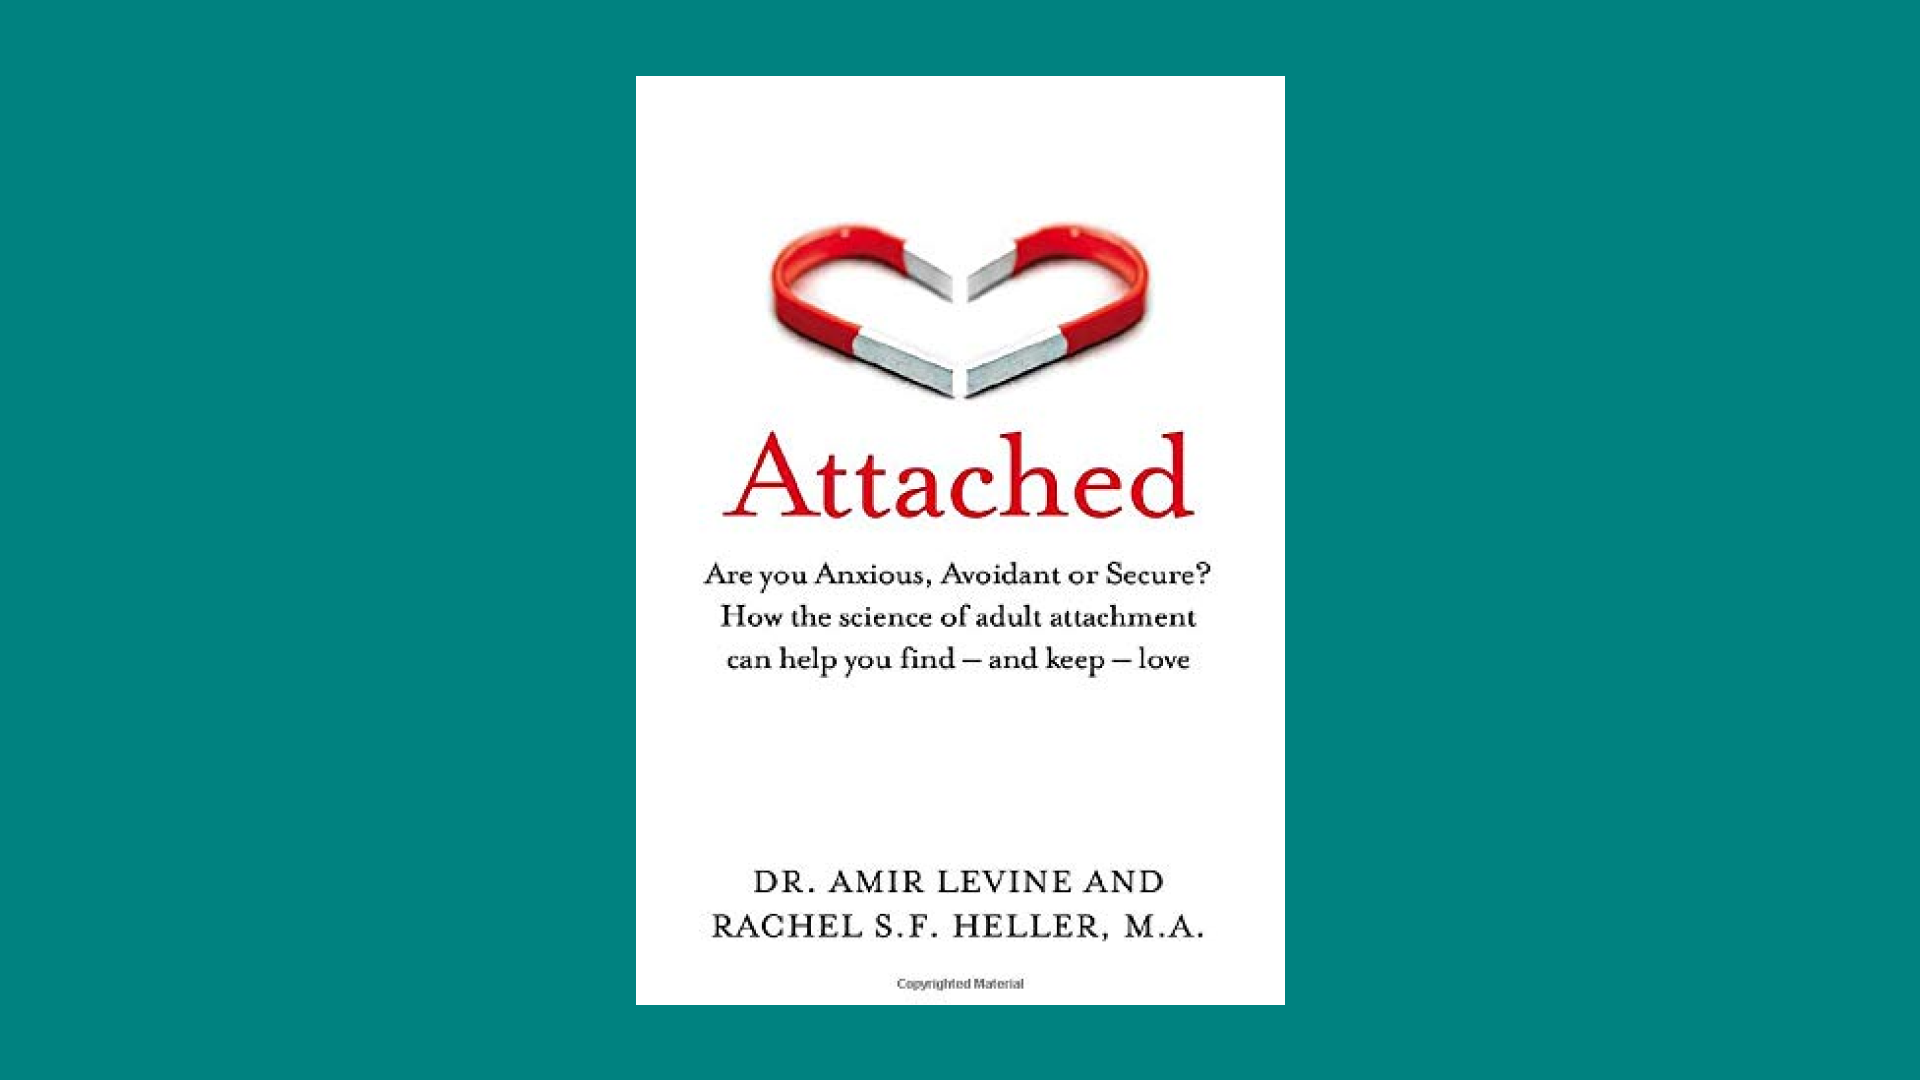  “Attached: Are you Anxious, Avoidant or Secure? How the science of adult attachment can help you find – and keep – love” by Amir Levine and Rachel Heller 